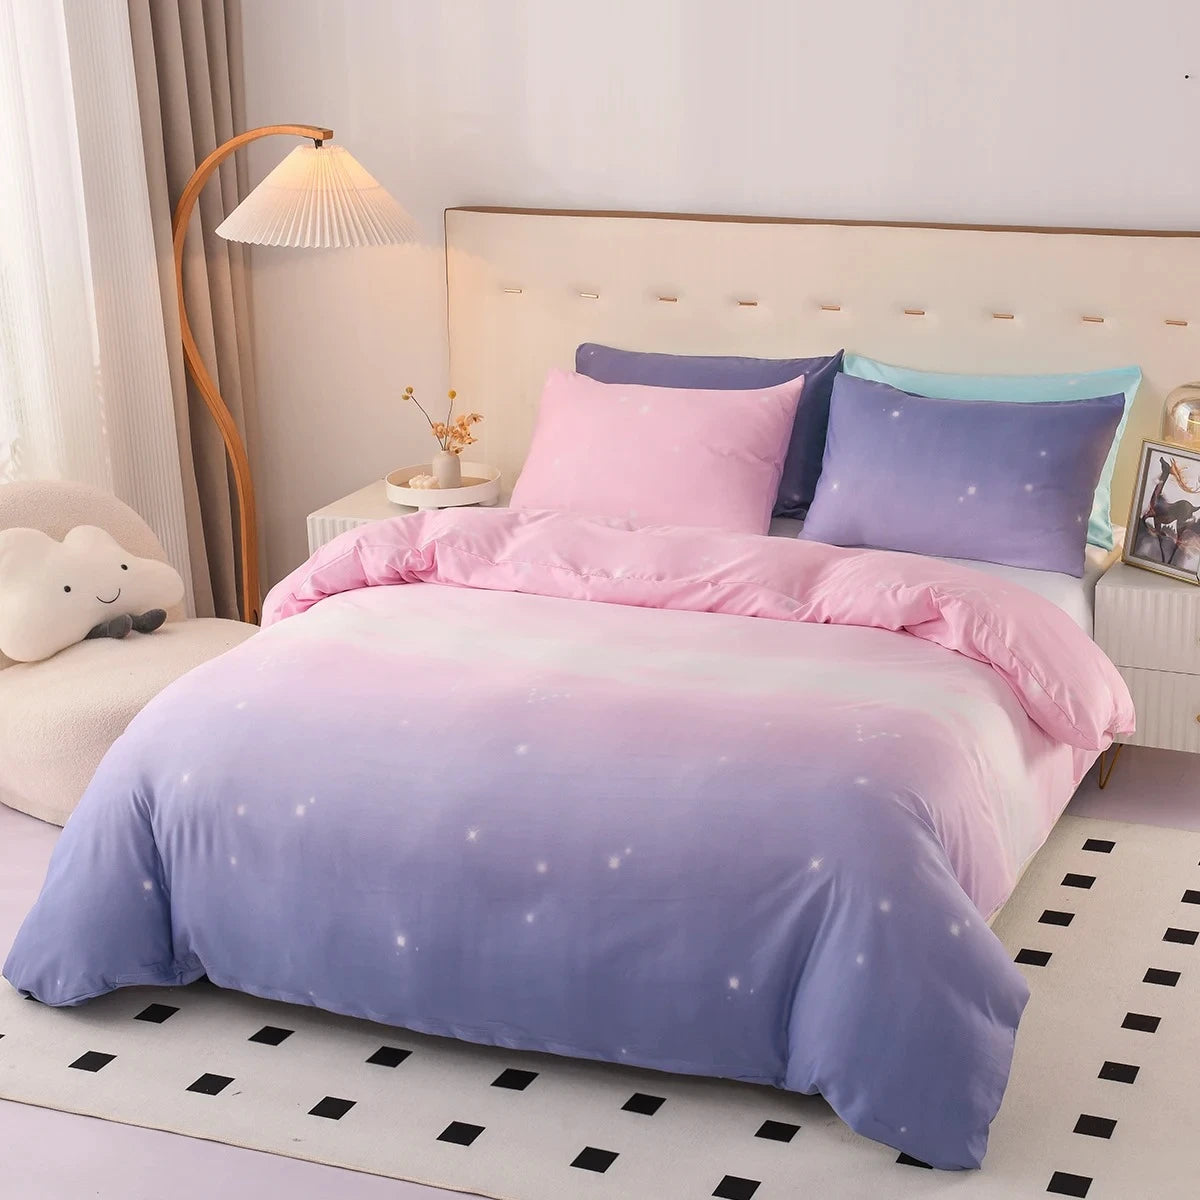 Bed standing in a bedroom fitted with a Pink and Purple Bedding set next to decorative elements